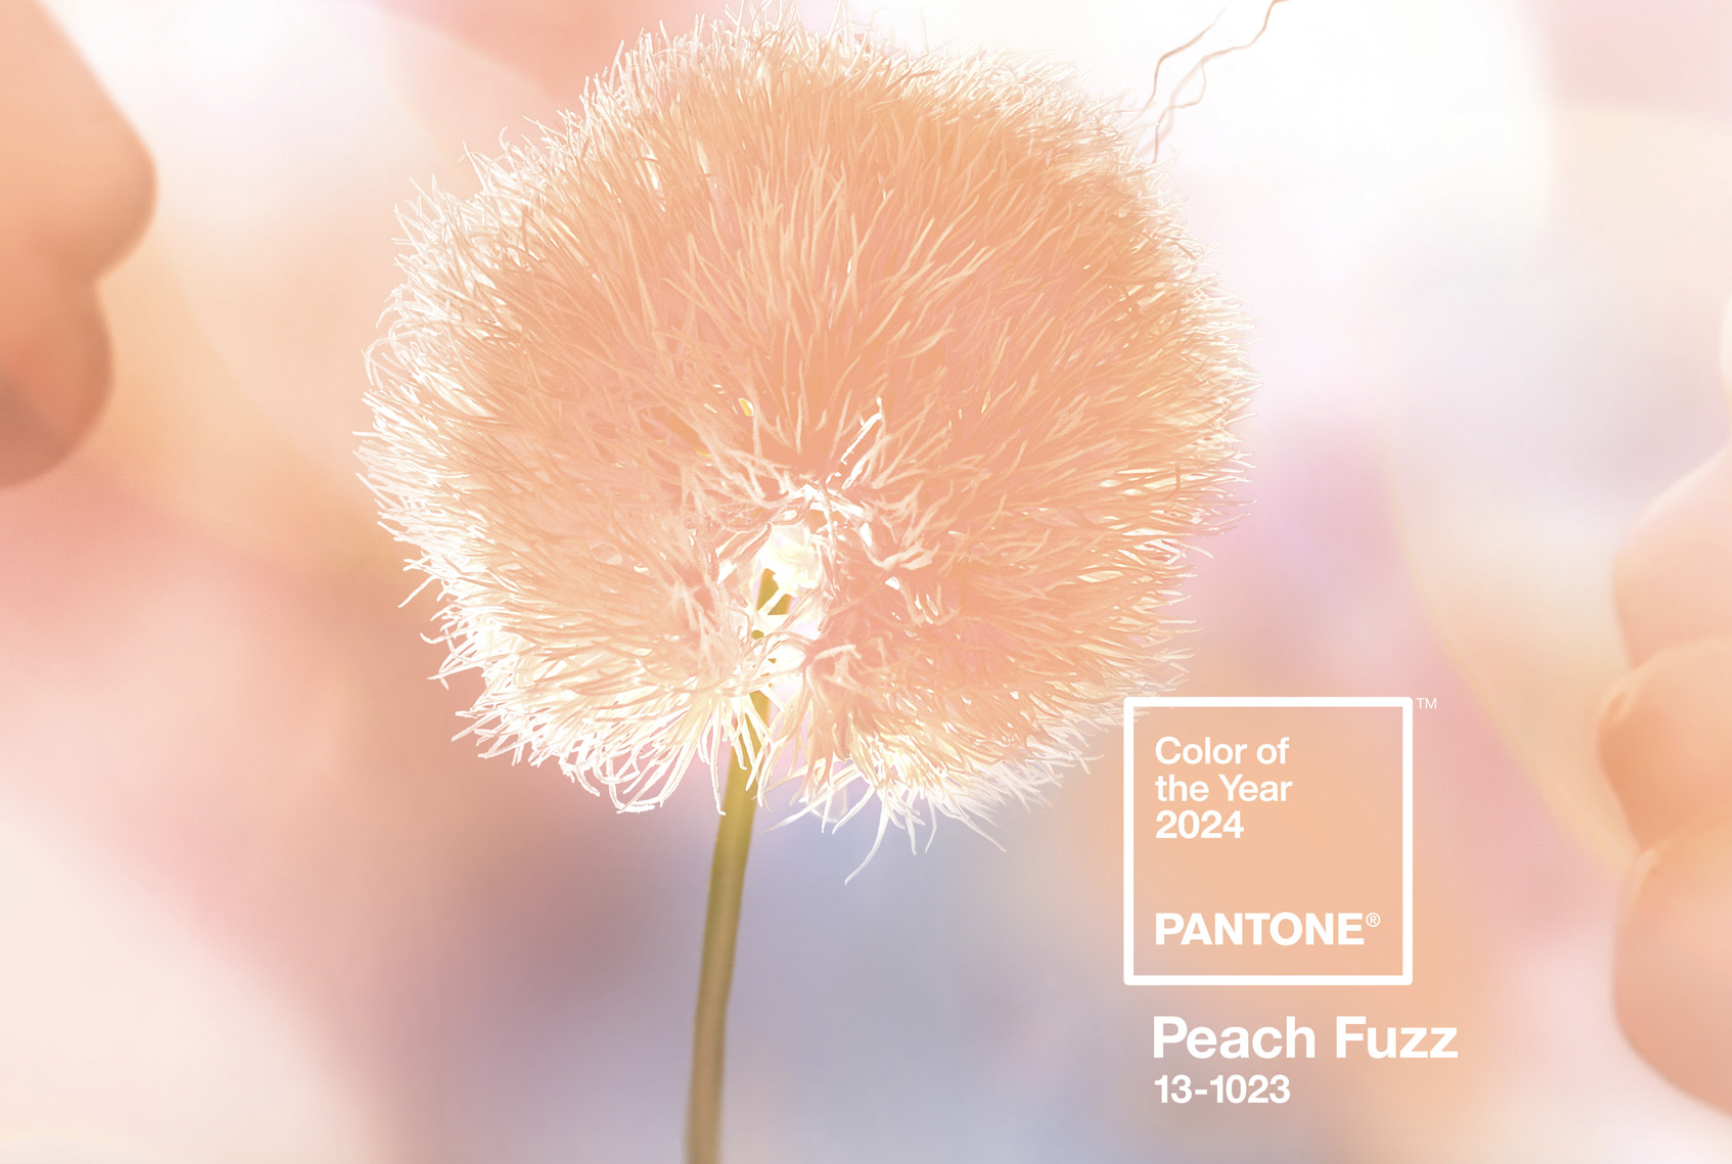 Pantone declares Peach Fuzz as the Color of the Year for 2024